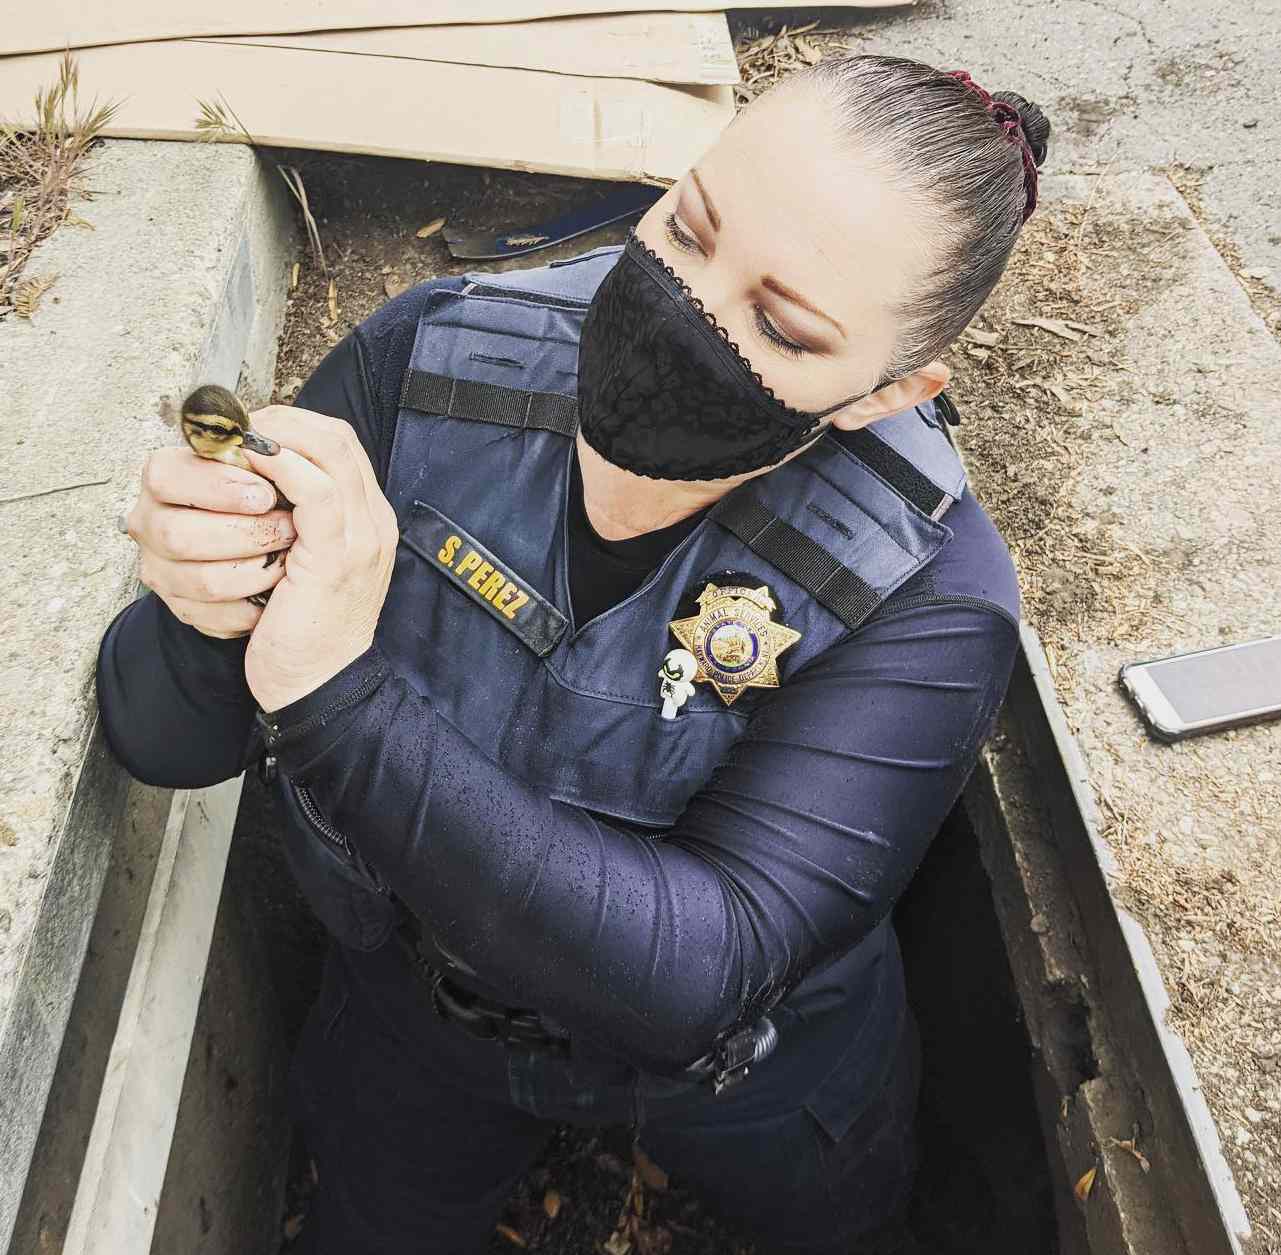 Animal control officer helps ducklings out of drain